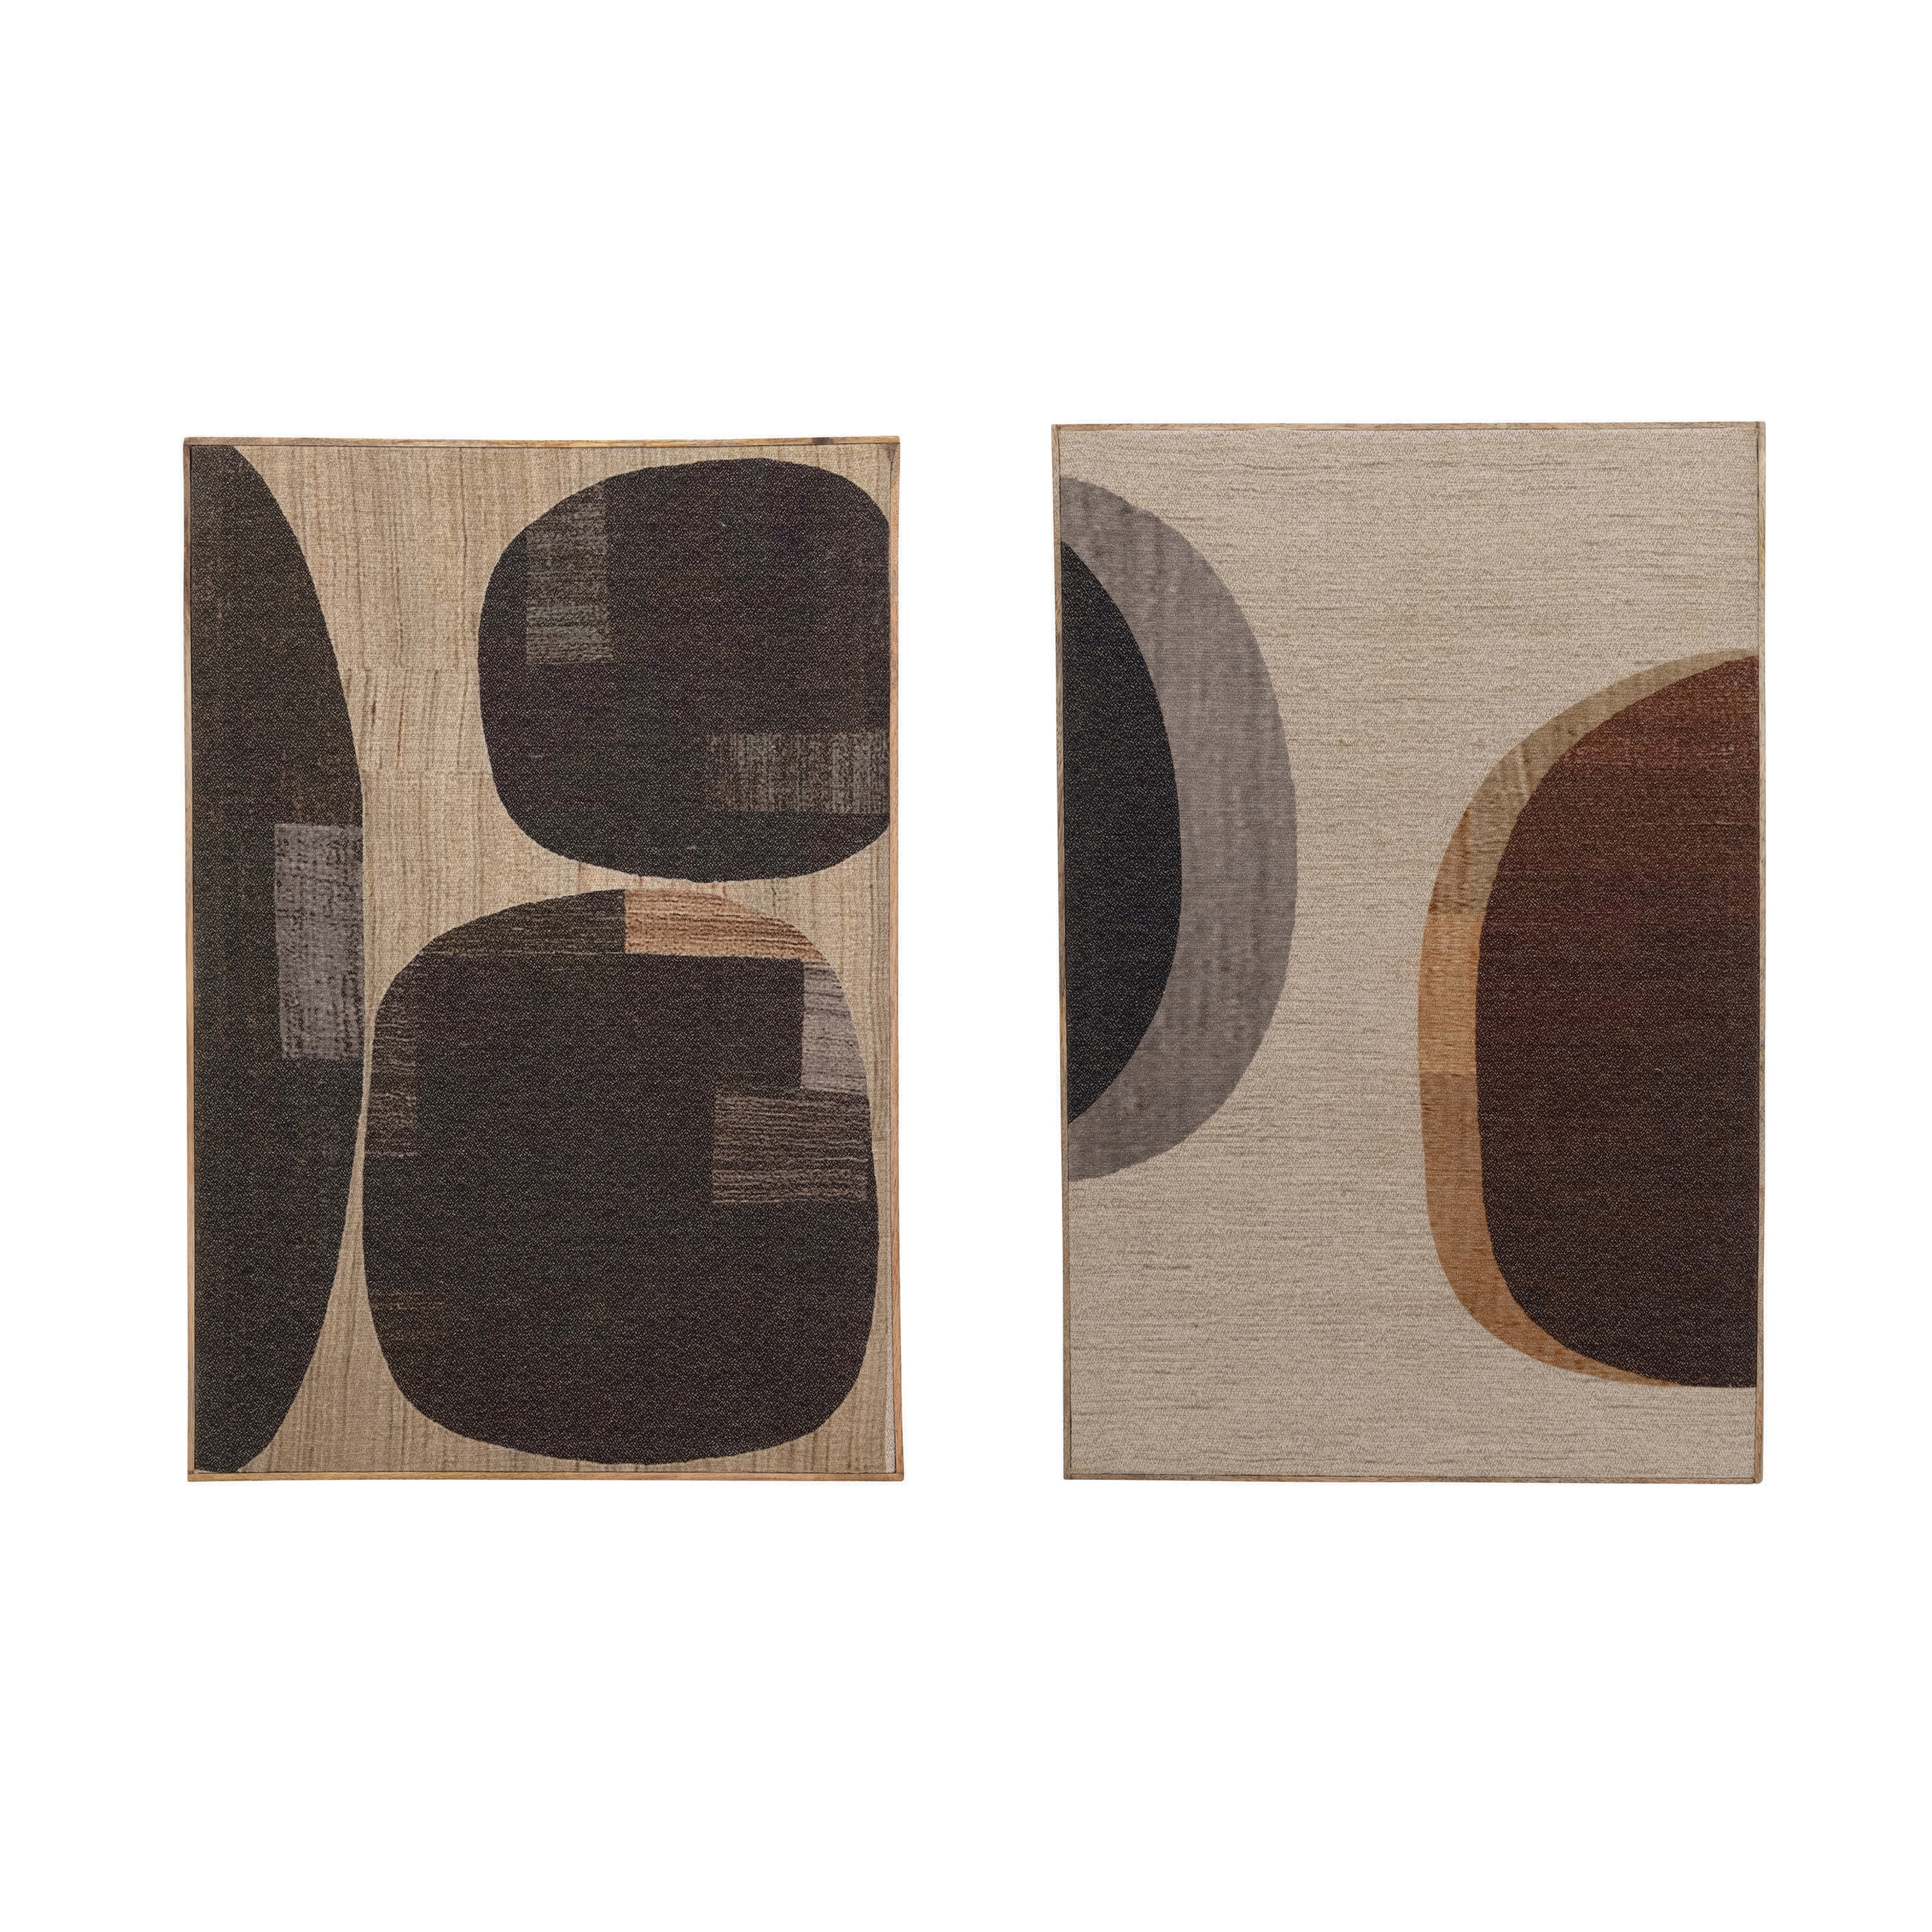 Mango Wood Framed Fabric Wall Decor with Abstract Print, Black & Beige, 2 Styles - Moss & Wilder